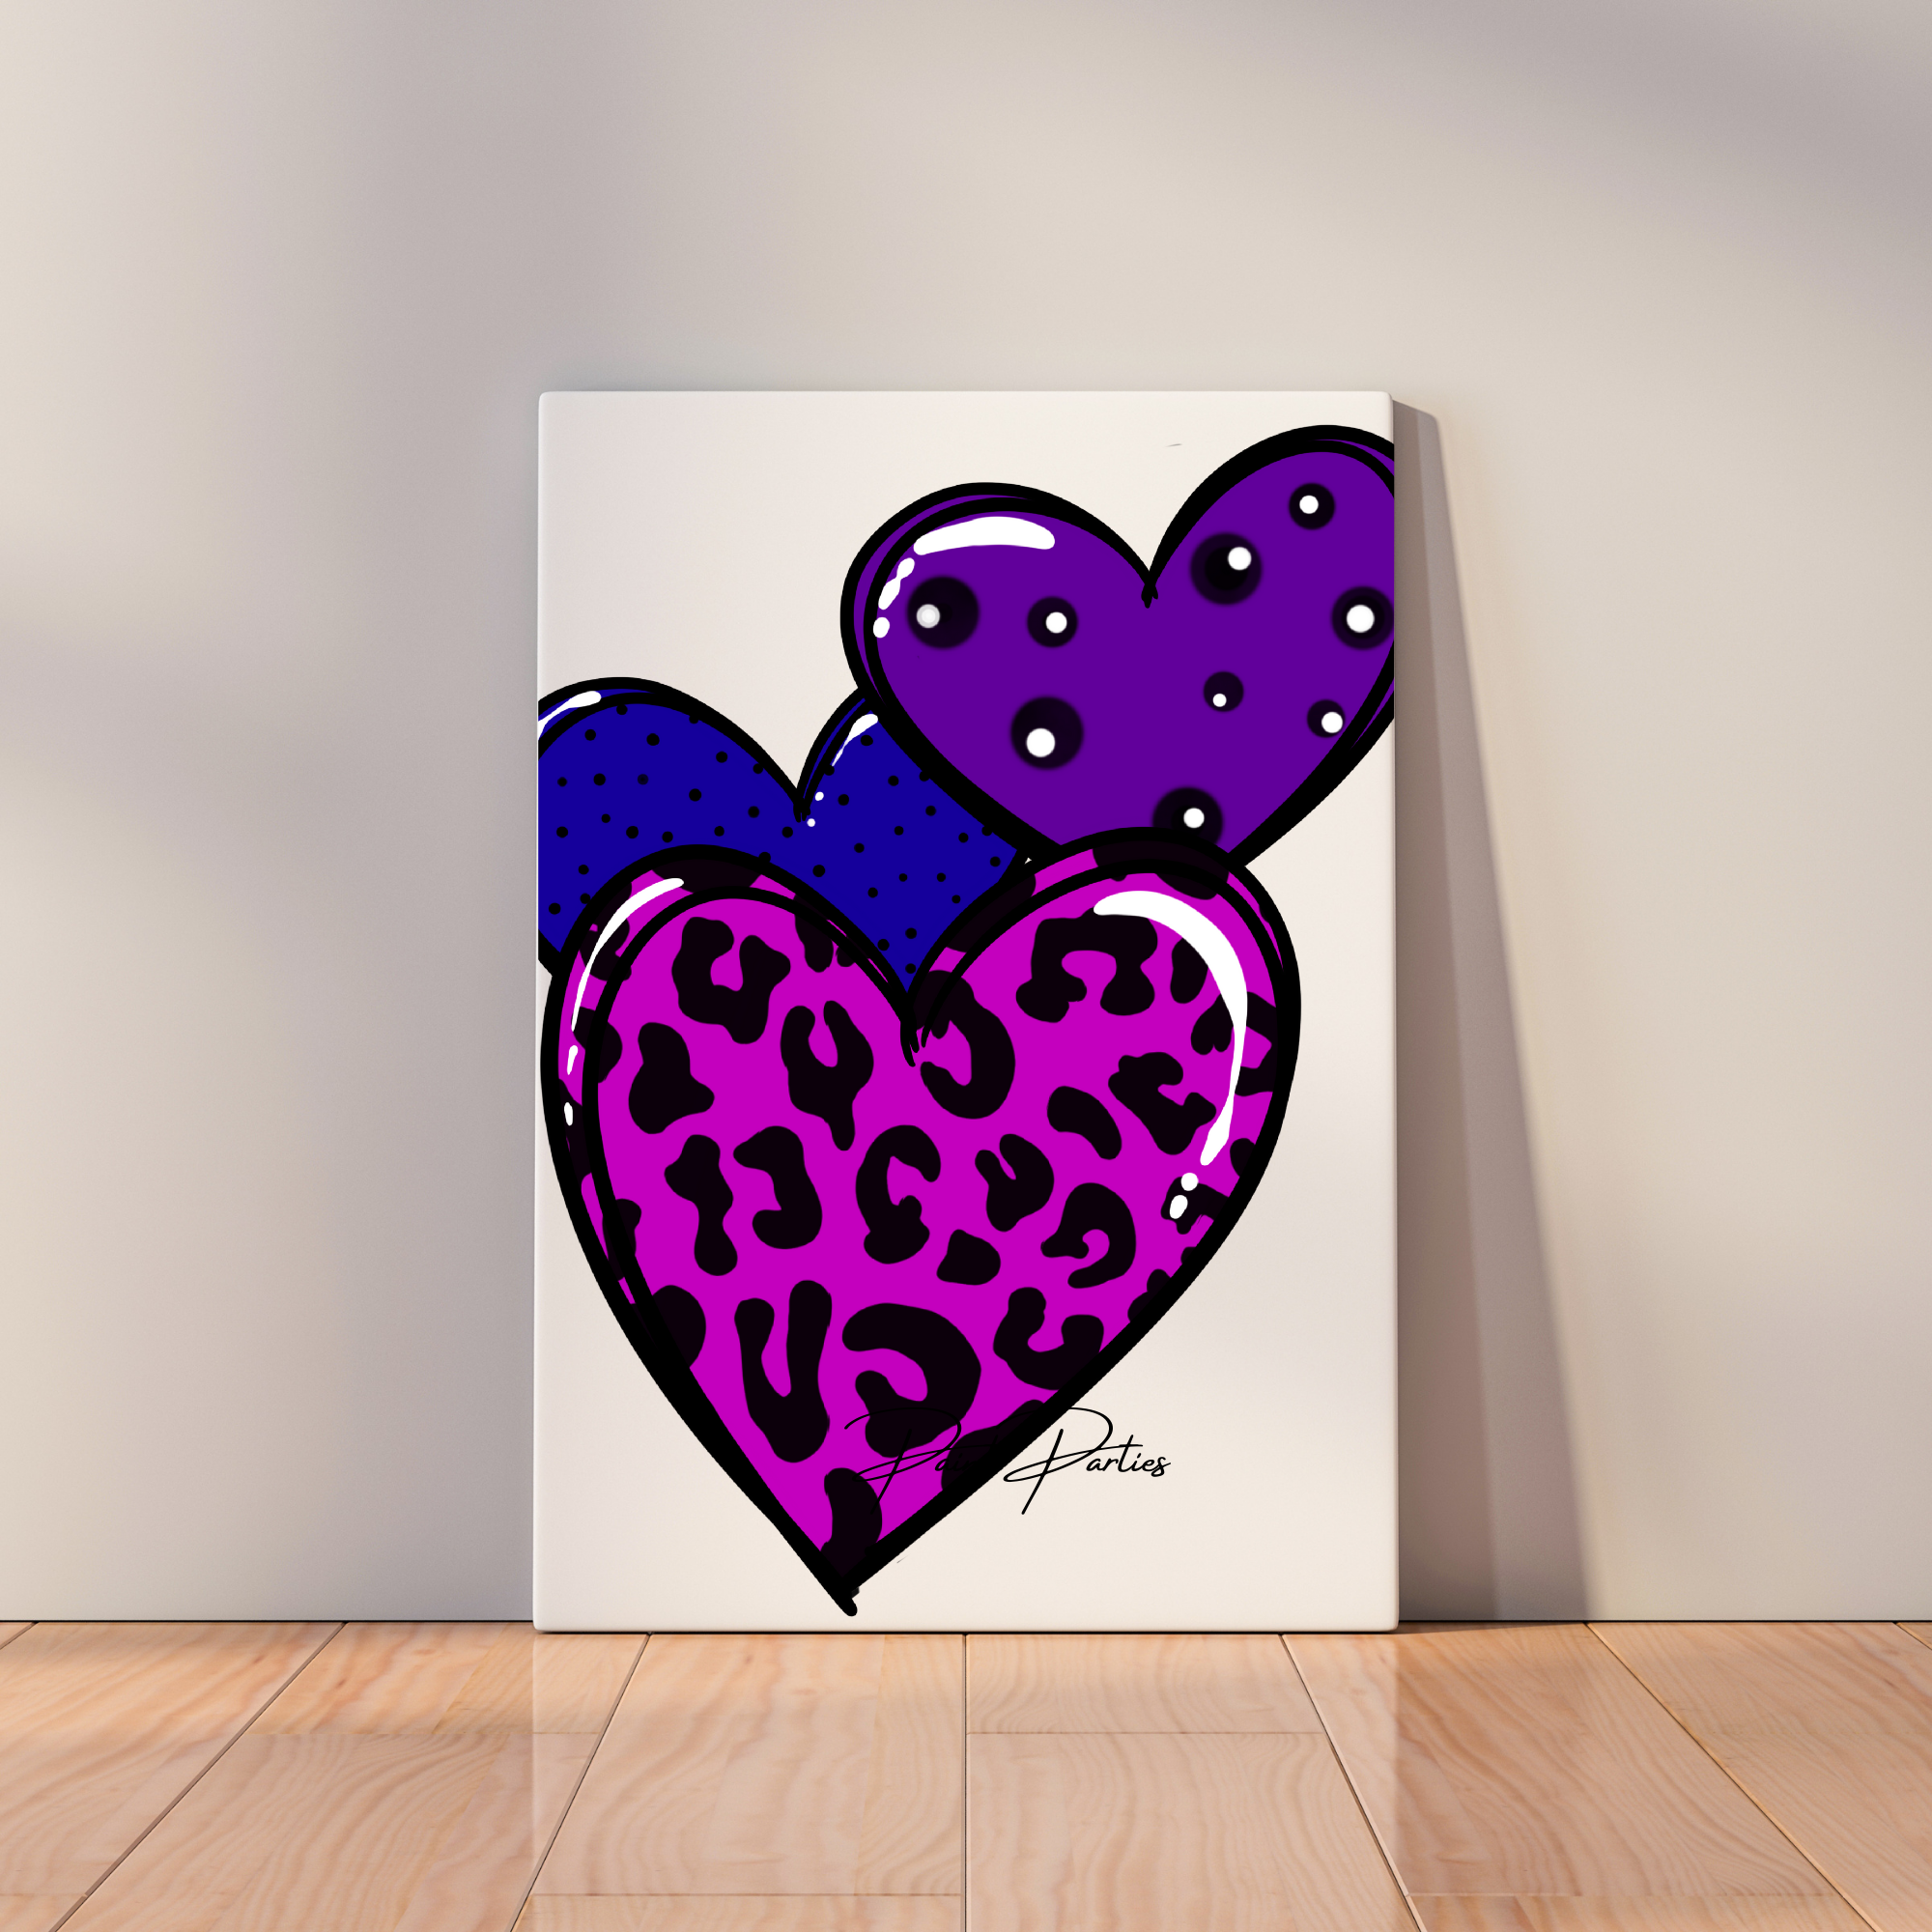 The Purple Toe Heart & Key Pre Drawn Canvas Painting Kit - 12”X16” (2 Pack) Sip and Paint Kit for Adult’s - Pre-Drawn Canvas Bundle Party Pack 